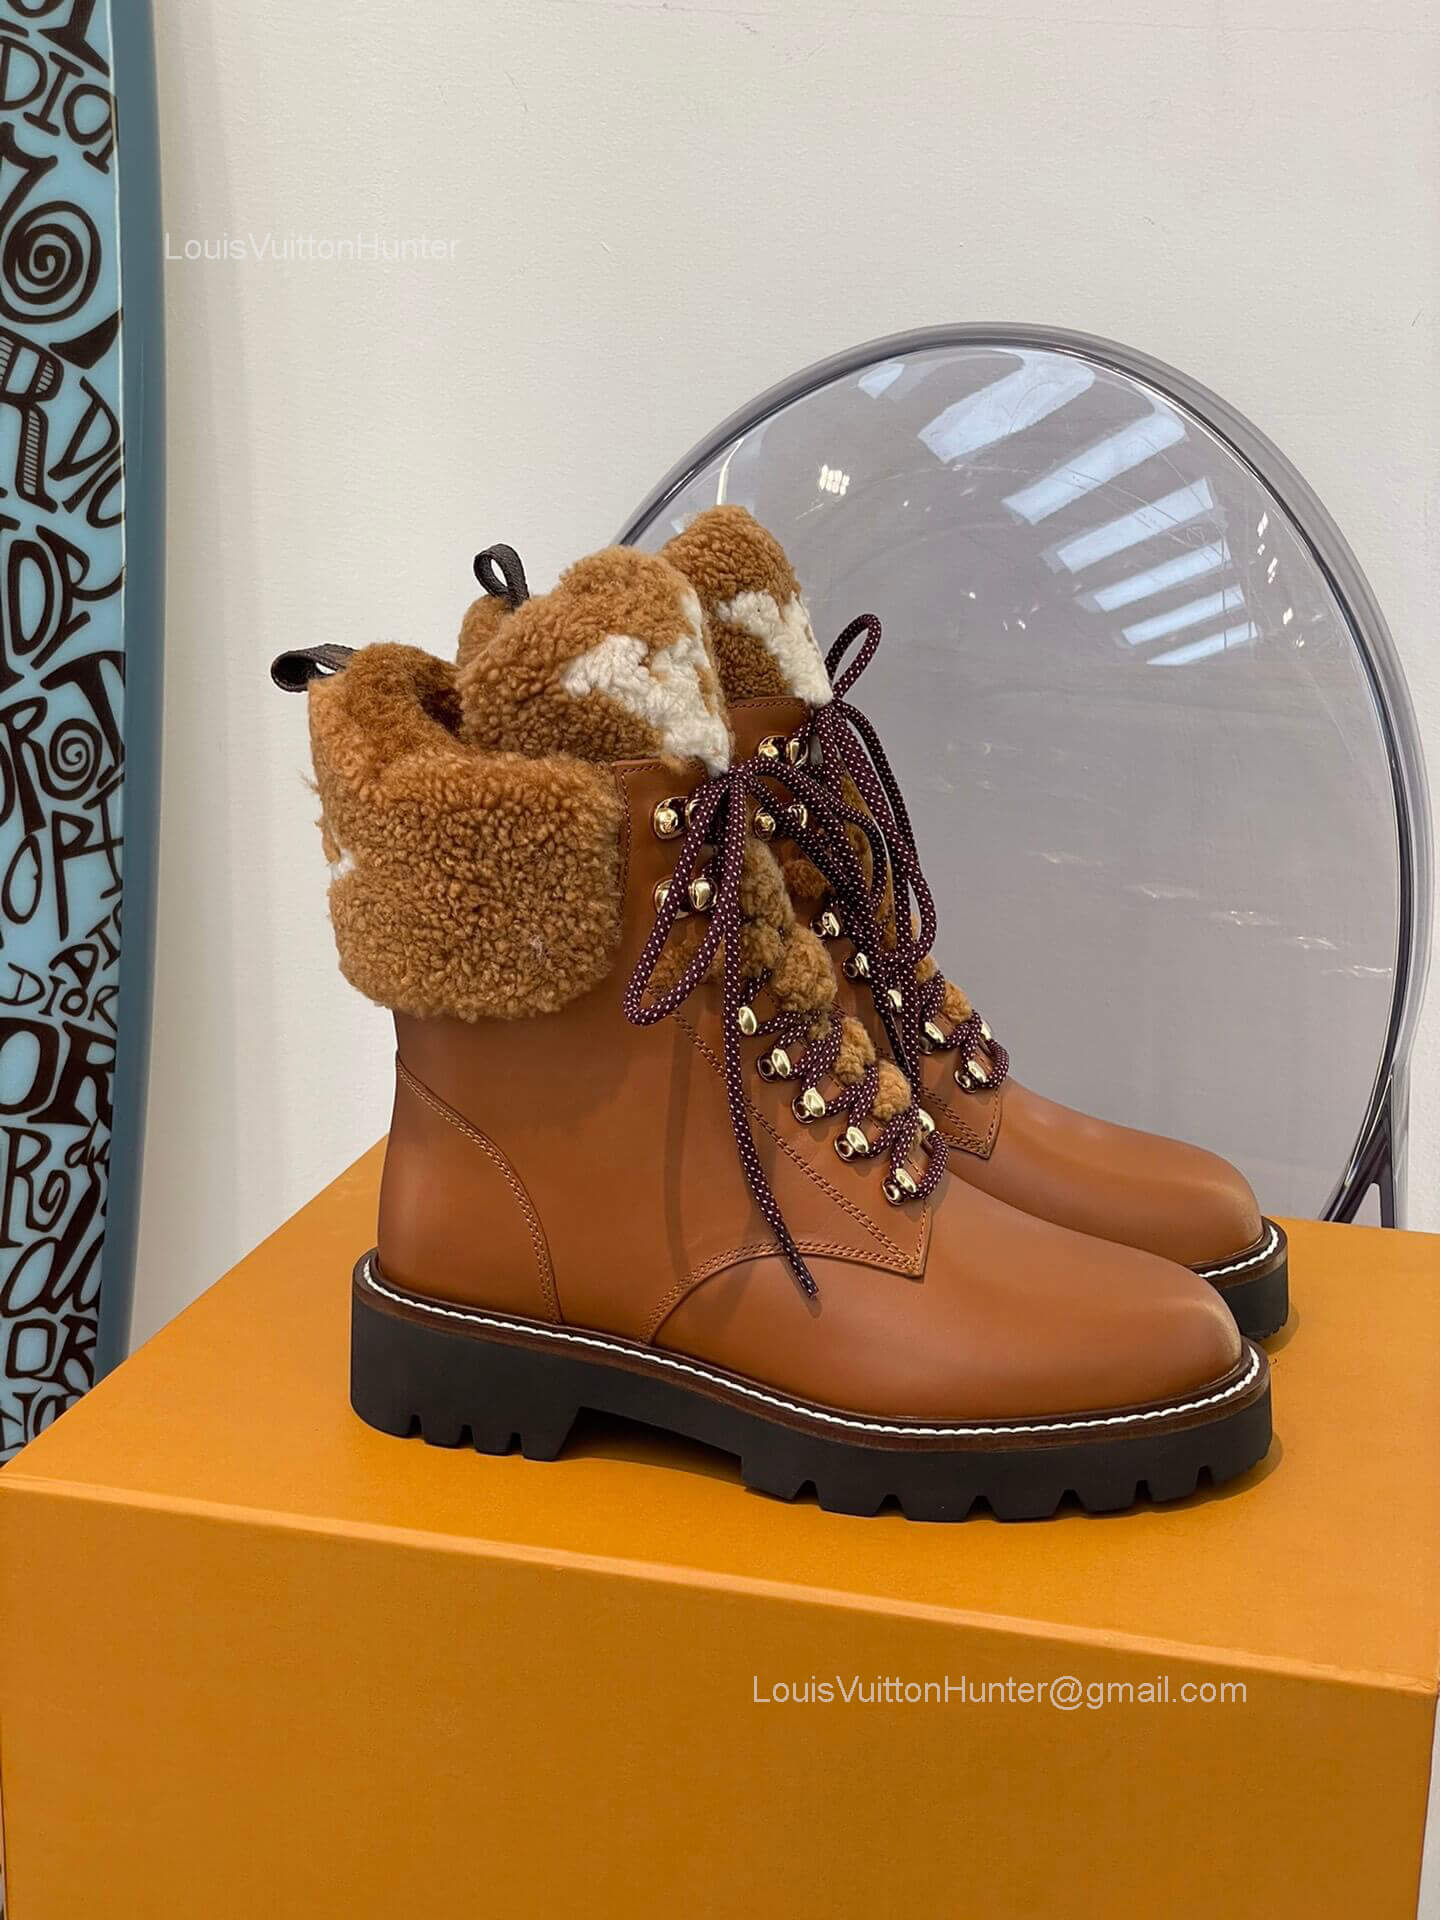 Louis Vuitton Metropolis Flat Ranger Ankle Boot with Shearling Fur in Tan Calf Leather 2281692